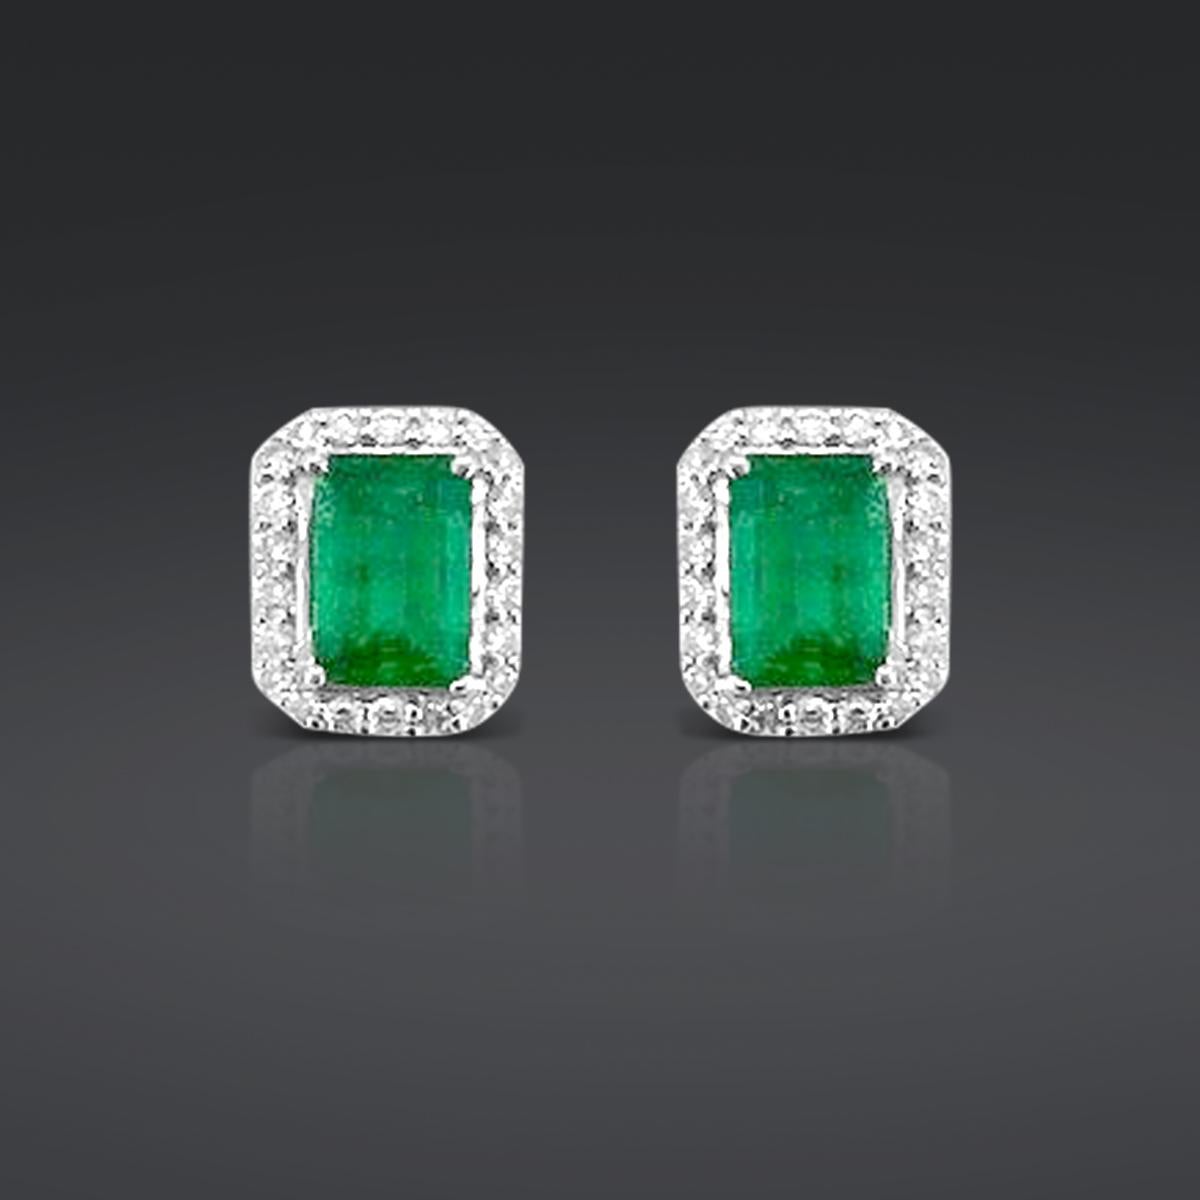 Octagon Cut 14K White Gold 1.67cts Emerald and Diamond Earring. Style# TS1117E